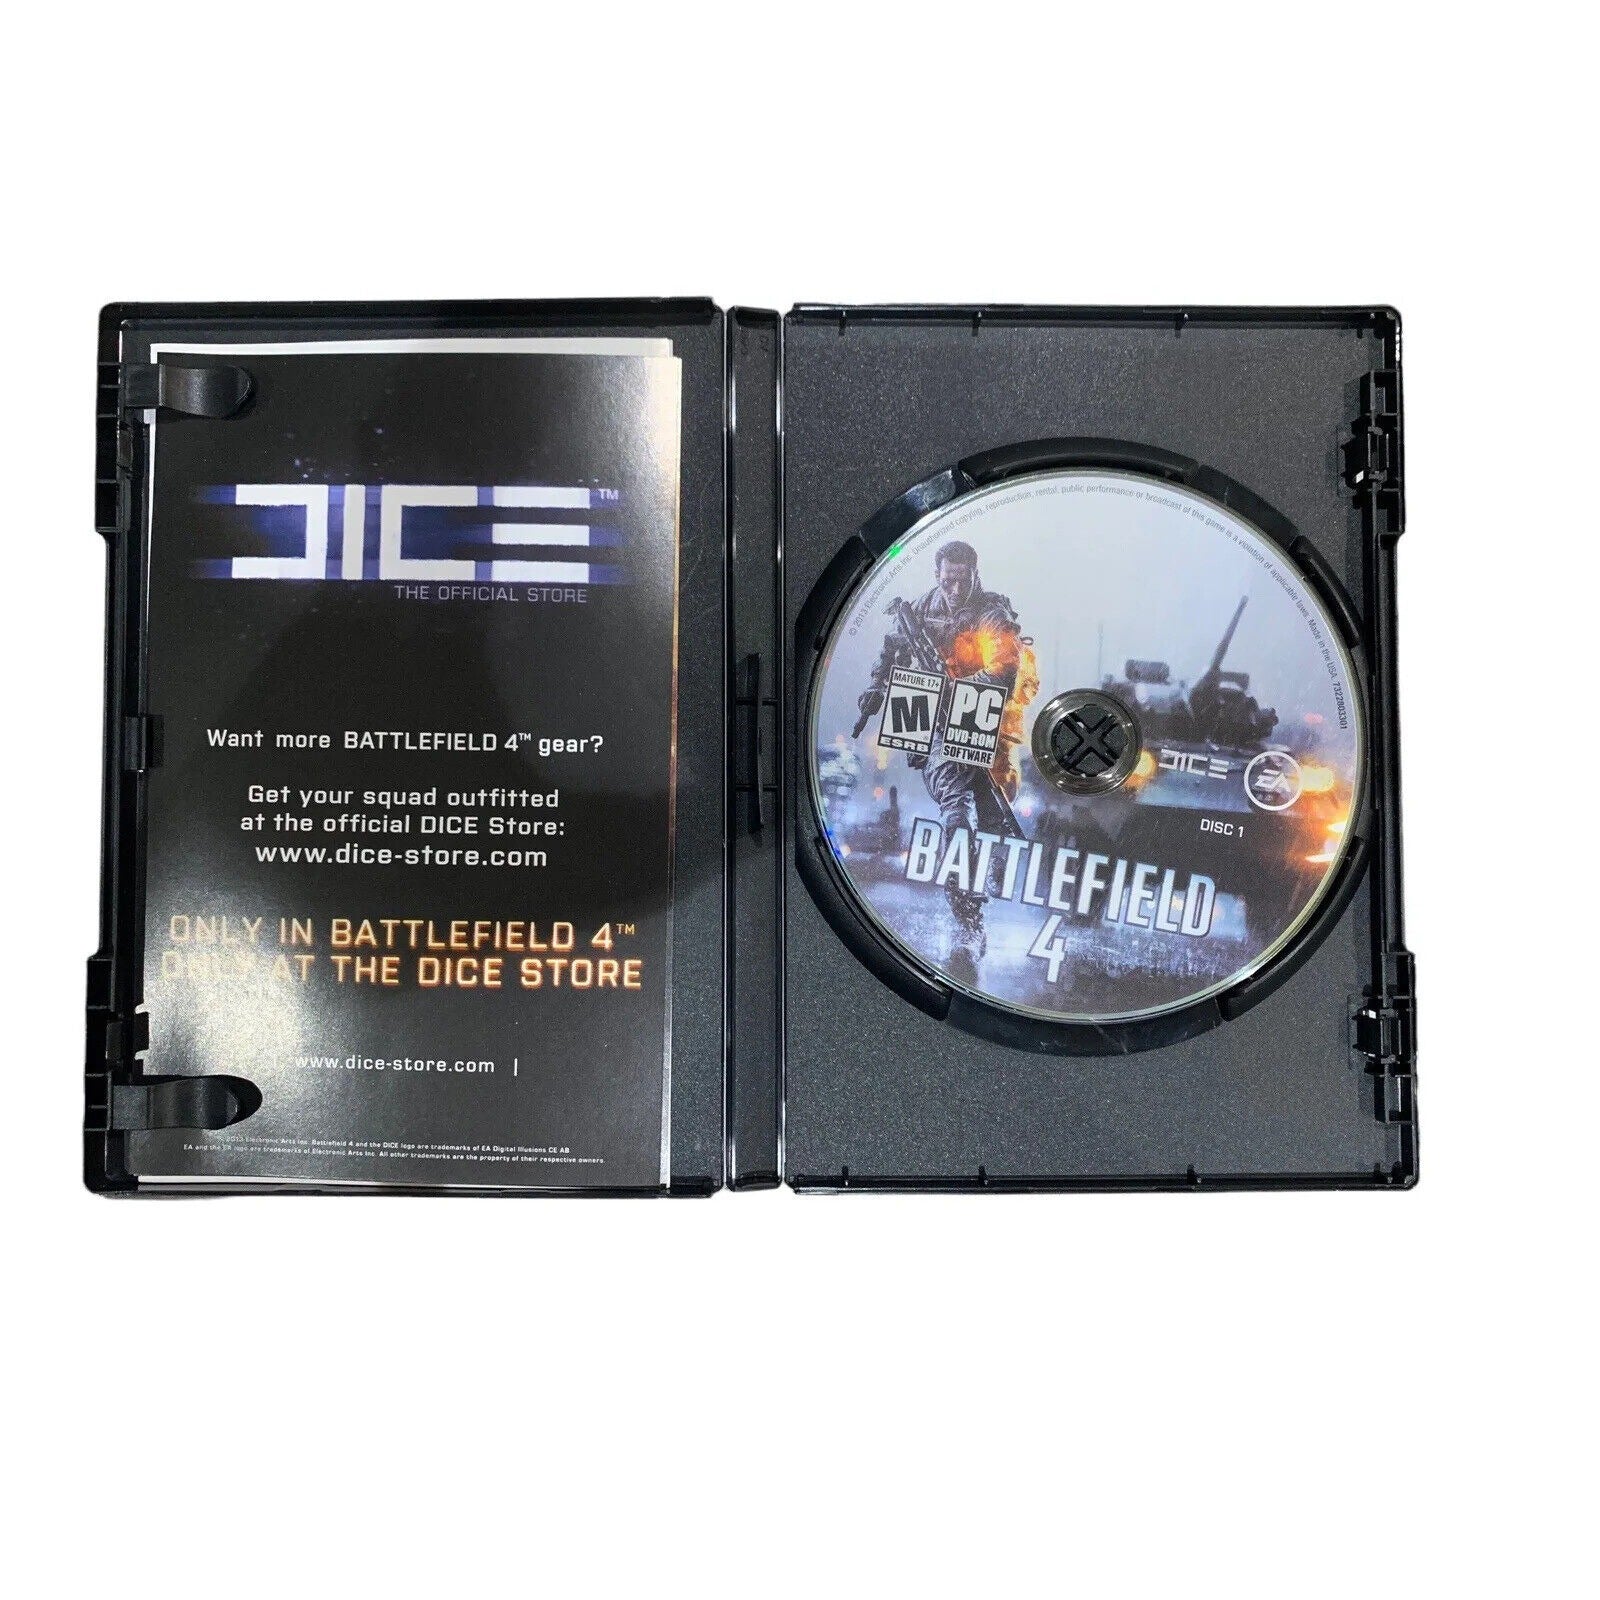 Game DVD and Description Sheet Displayed In Case